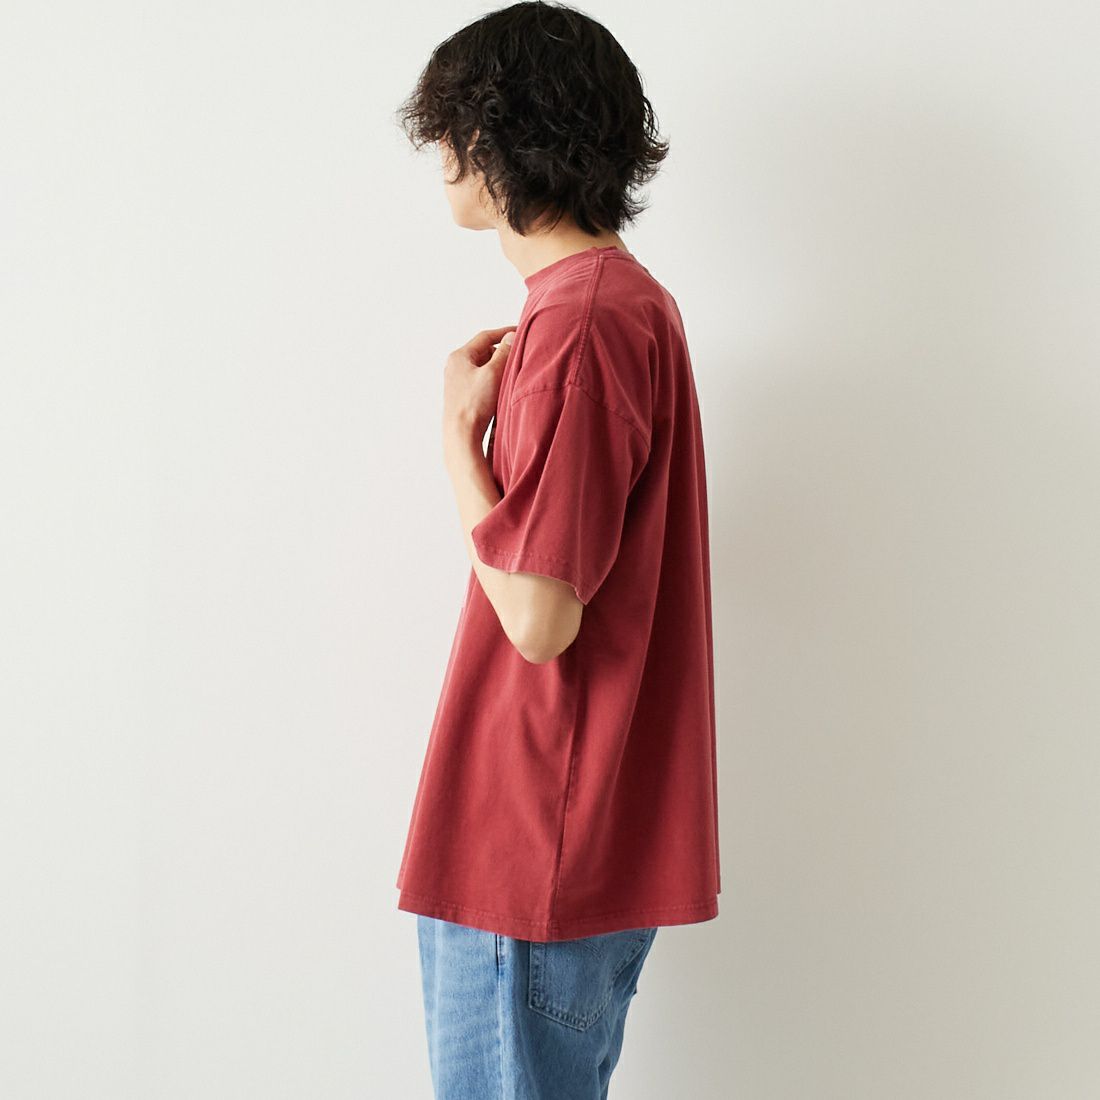 REMI RELIEF [レミレリーフ] 別注 20天竺プリントTシャツ GIANT [RN24329271-JF] RED &&モデル身長：182cm 着用サイズ：M&&